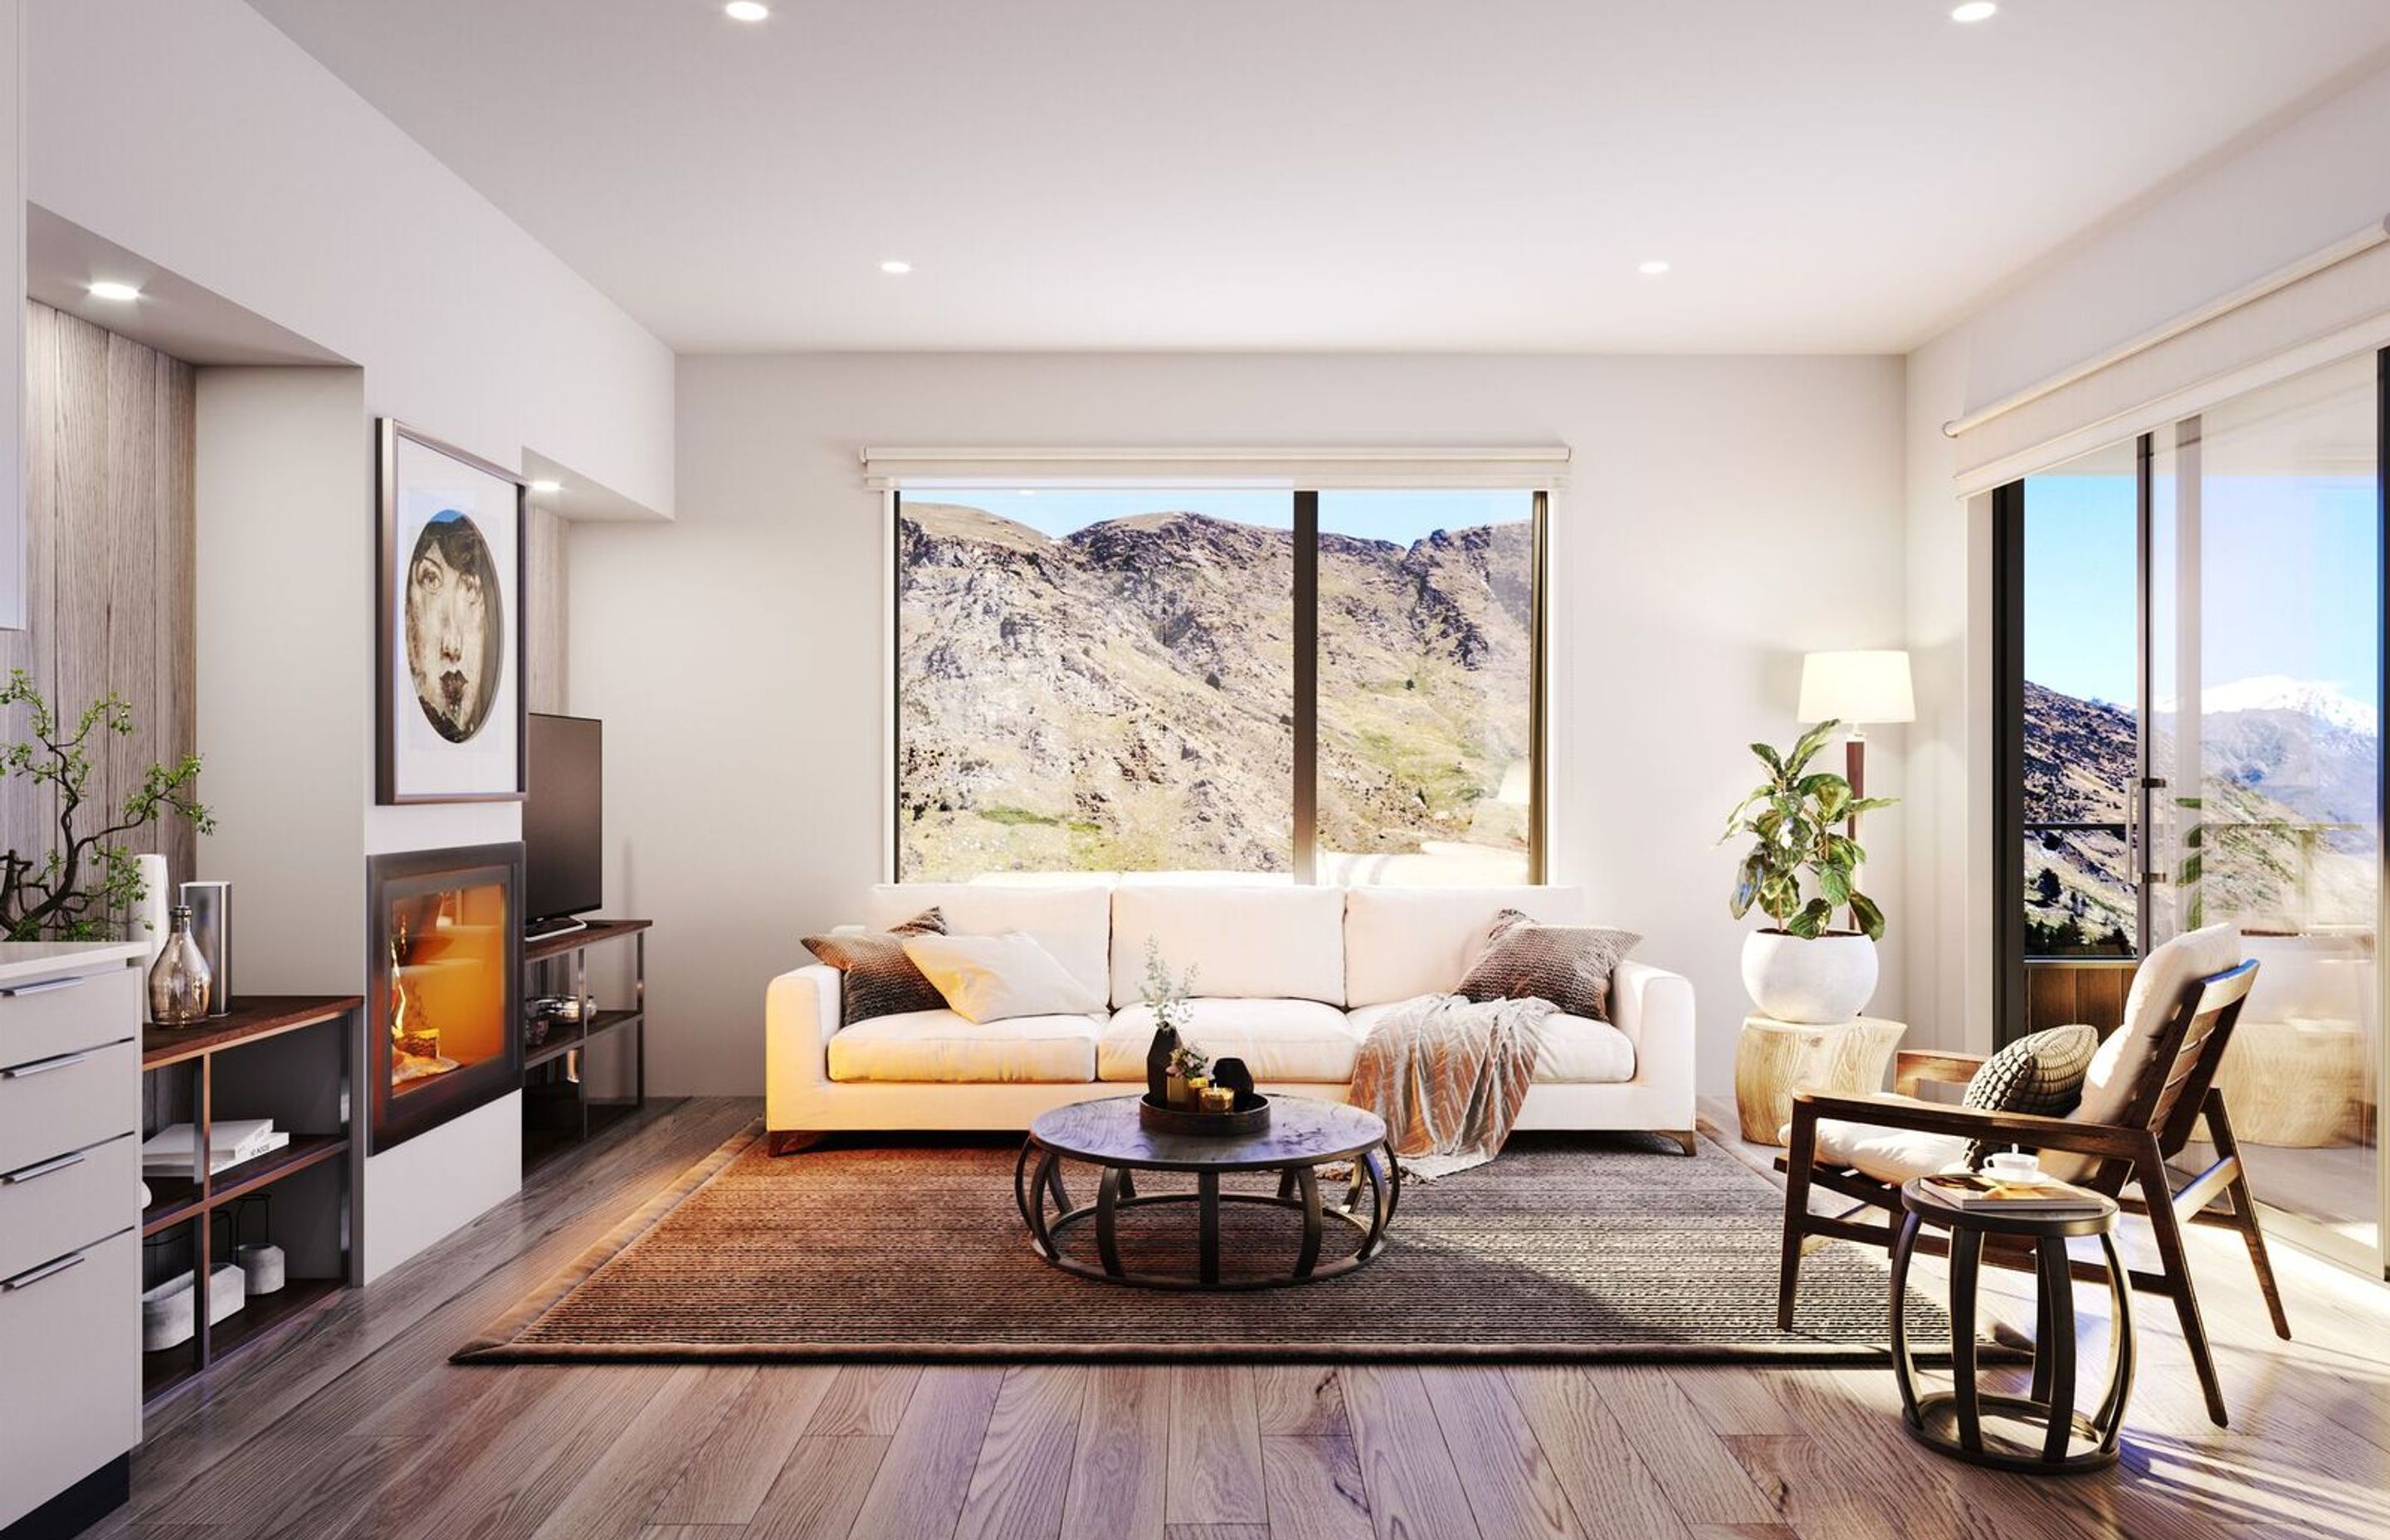 Residence du Parc - Arthurs Point, Queenstown - Architectural renders completed by onetoonehundred.